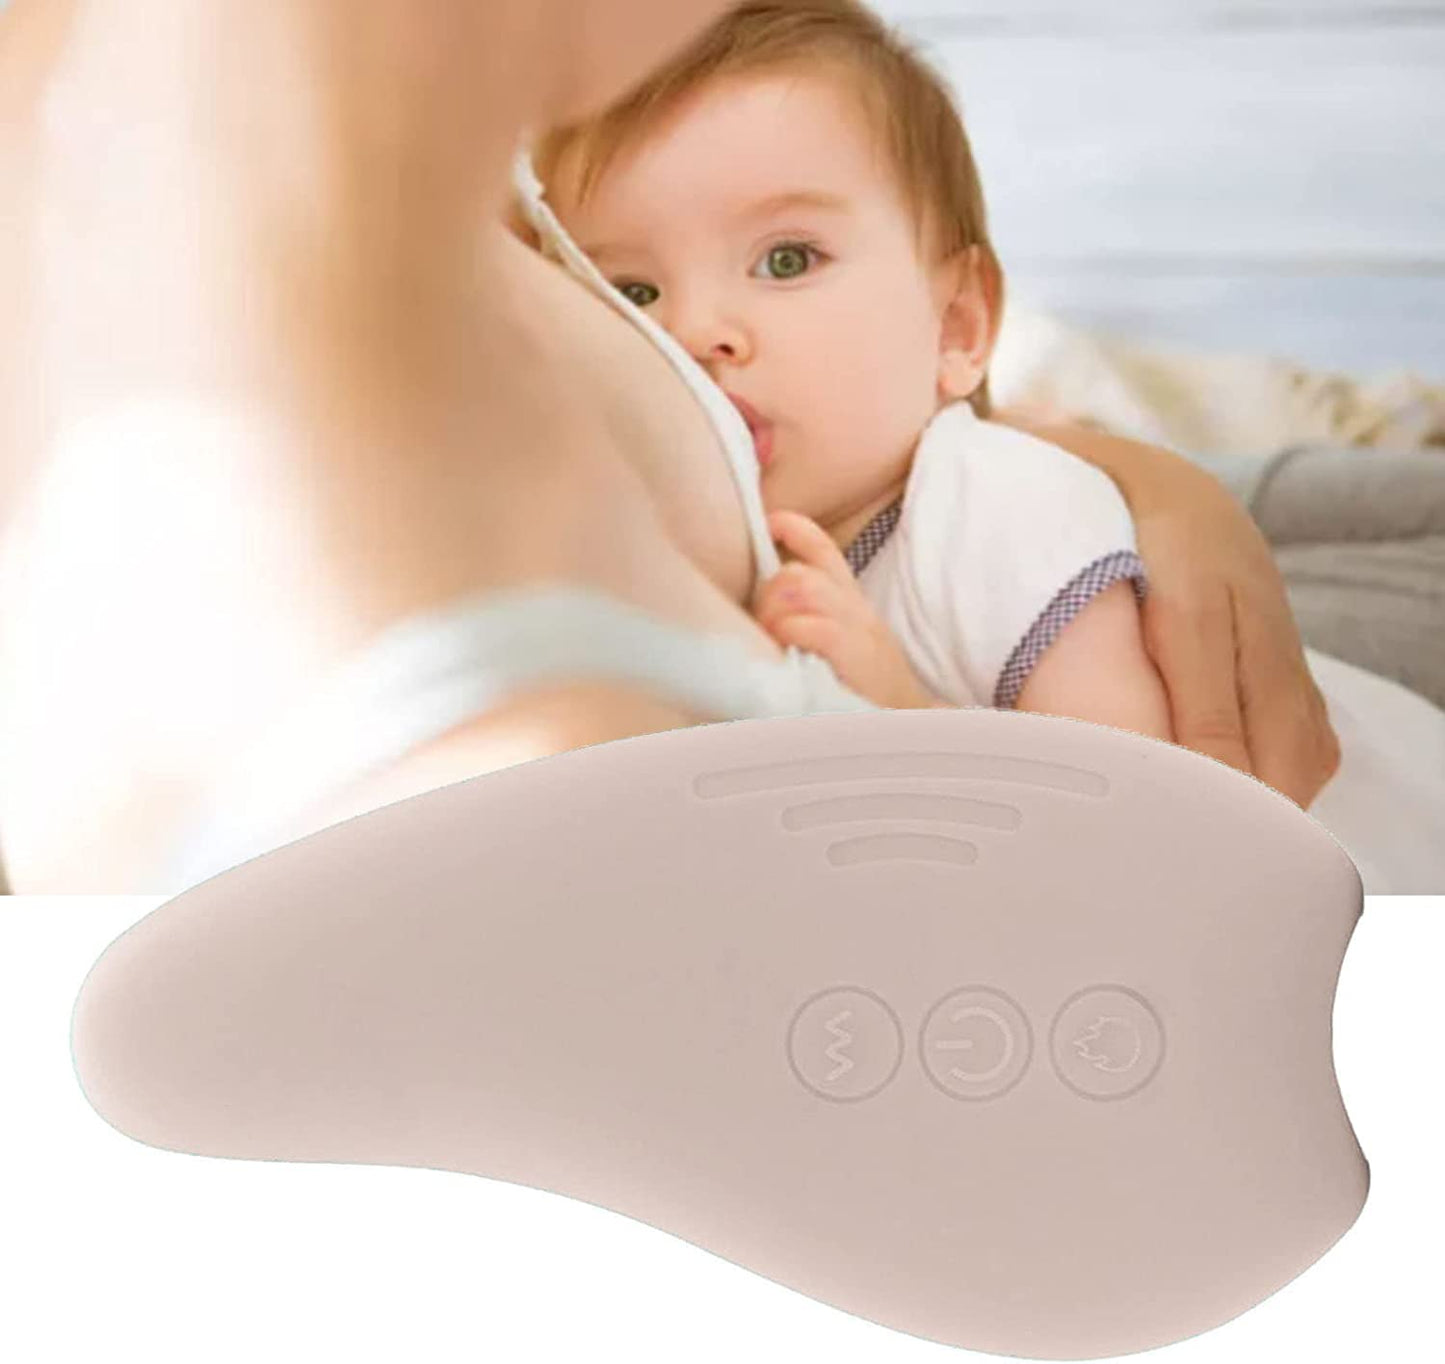 Mamomy Lactation Massager, Heat and Vibration, Pumping and Breastfeeding Essential, for Improved Milk Flow, Added Comfort